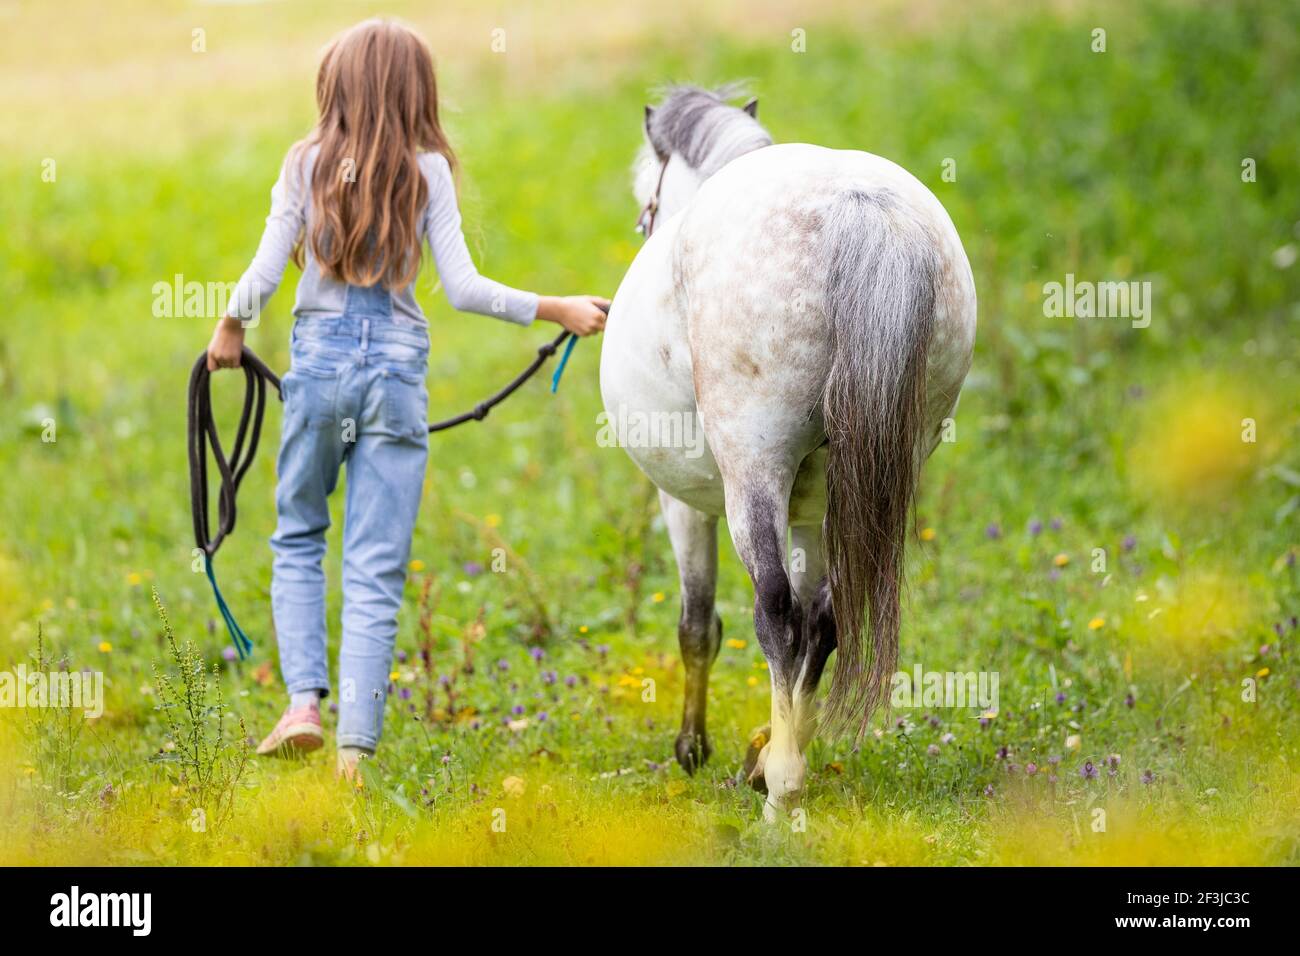 Welsh Mountain Pony, Section A. A girl leads a white horse from the pasture. Germany Stock Photo